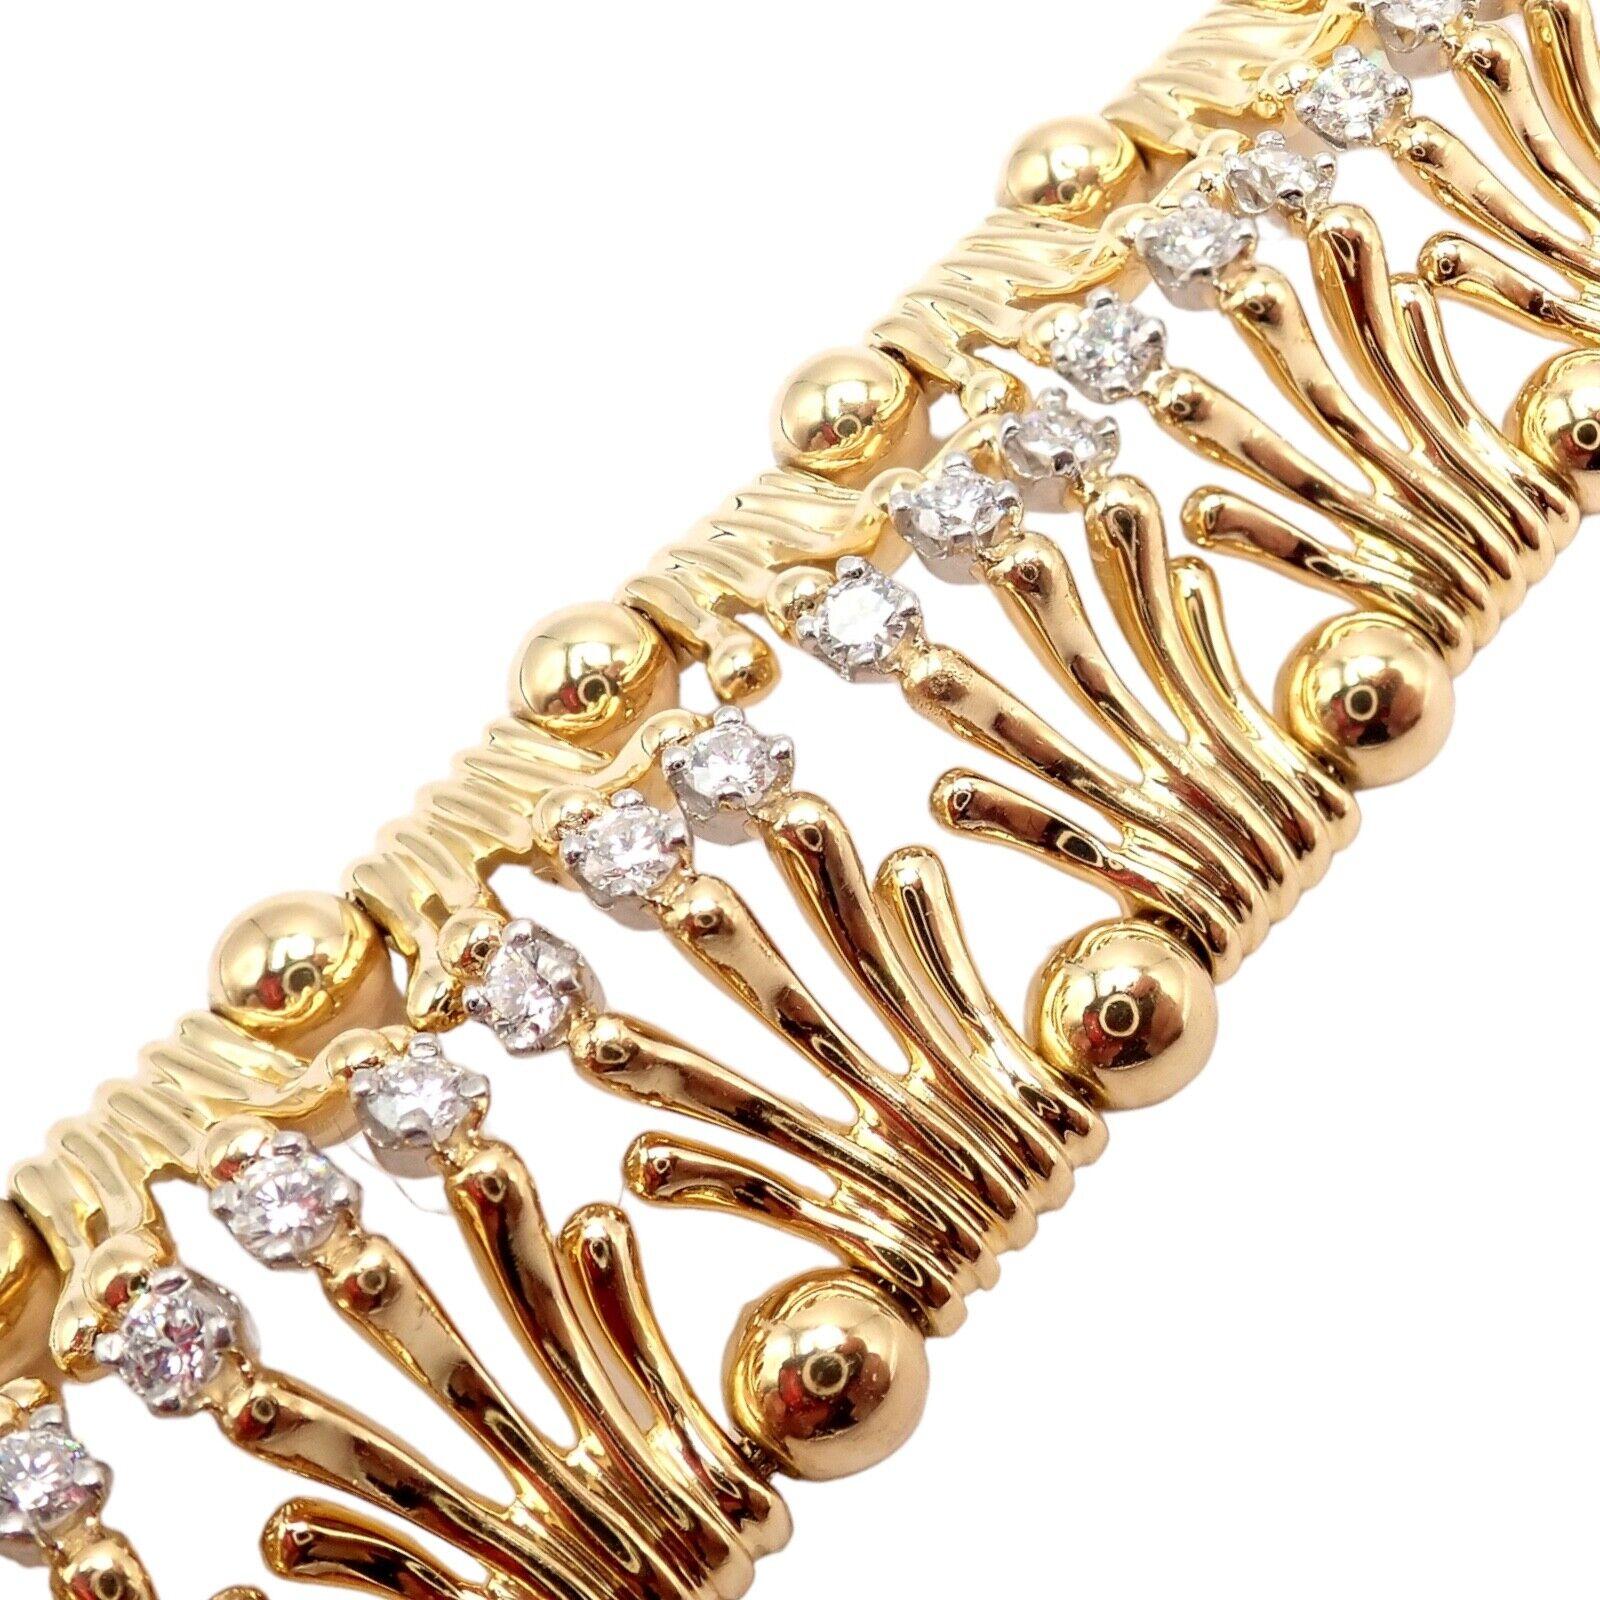 Tiffany & Co Jean Schlumberger Diamond Yellow Gold And Platinum Hands Bracelet For Sale 1